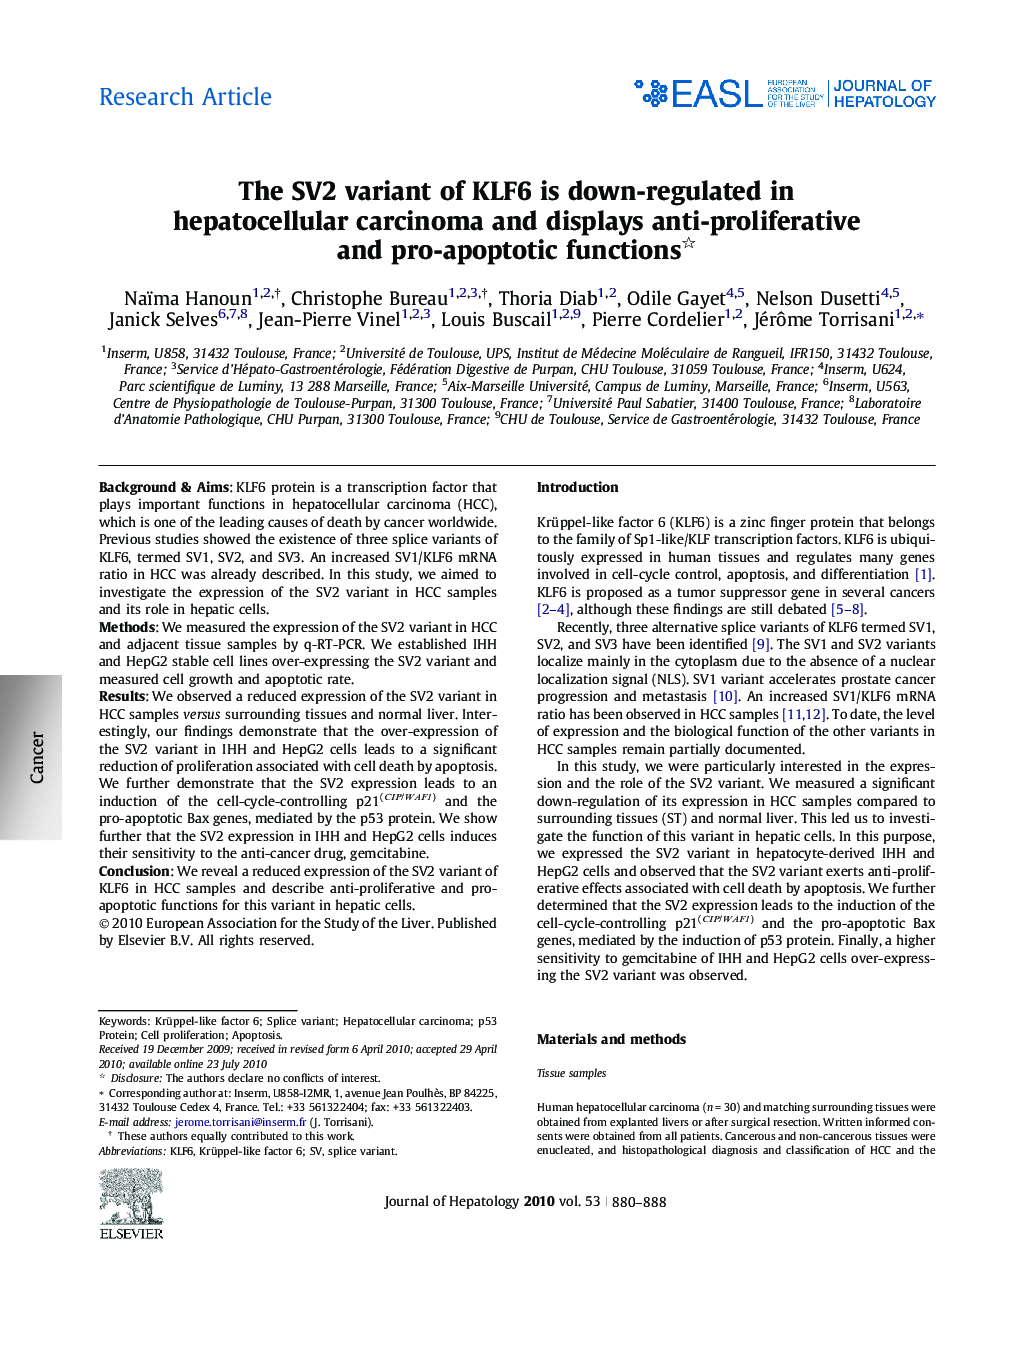 Research ArticleThe SV2 variant of KLF6 is down-regulated in hepatocellular carcinoma and displays anti-proliferative and pro-apoptotic functions